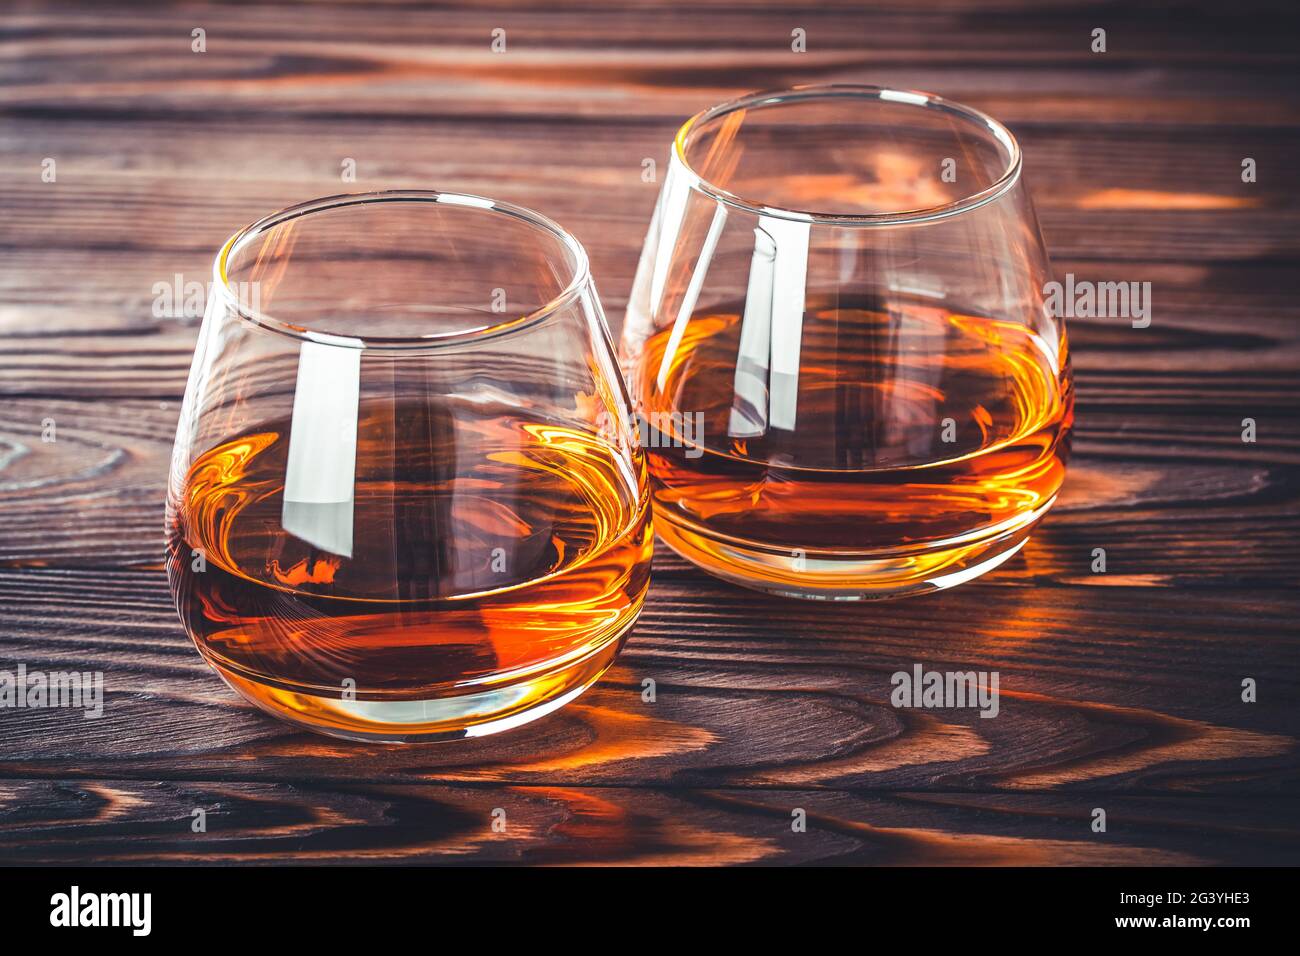 Two glass of whiskey, cognac, brandy on a dark brown wooden table. Bourbon. Strong alcohol drink close-up. Rum, scotch. Still life in a rustic style Stock Photo